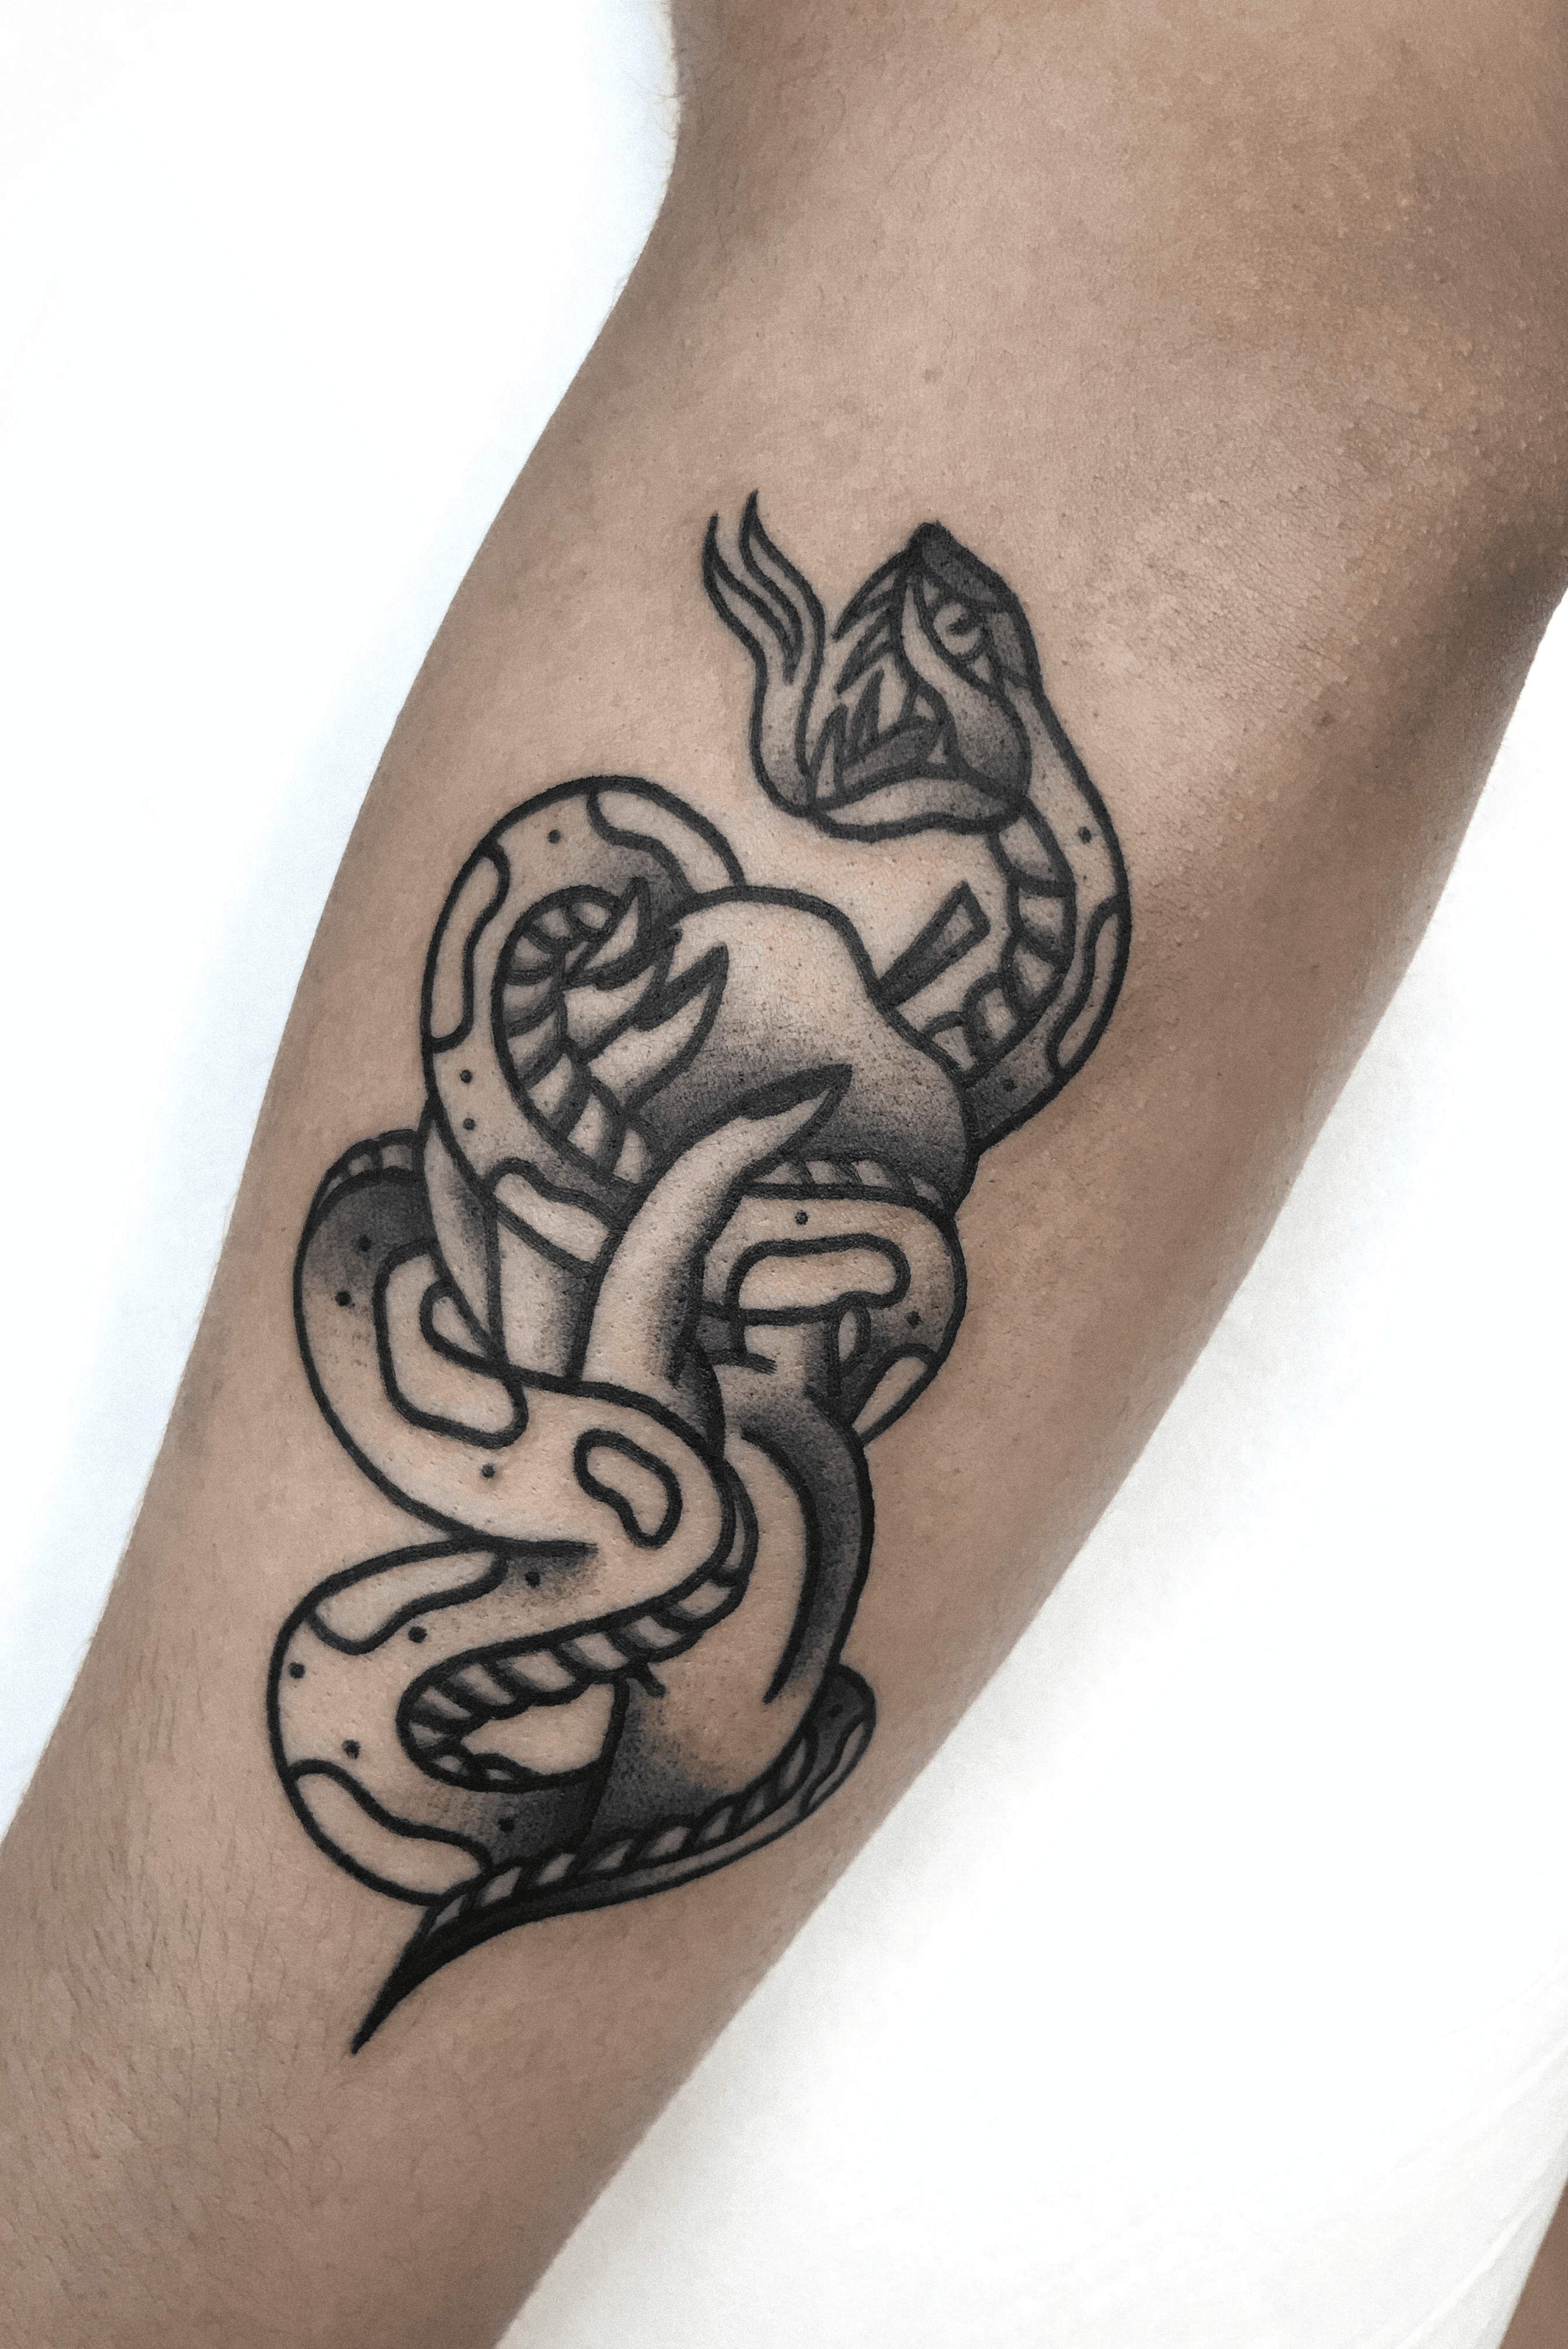 Details more than 87 double snake tattoo meaning  thtantai2